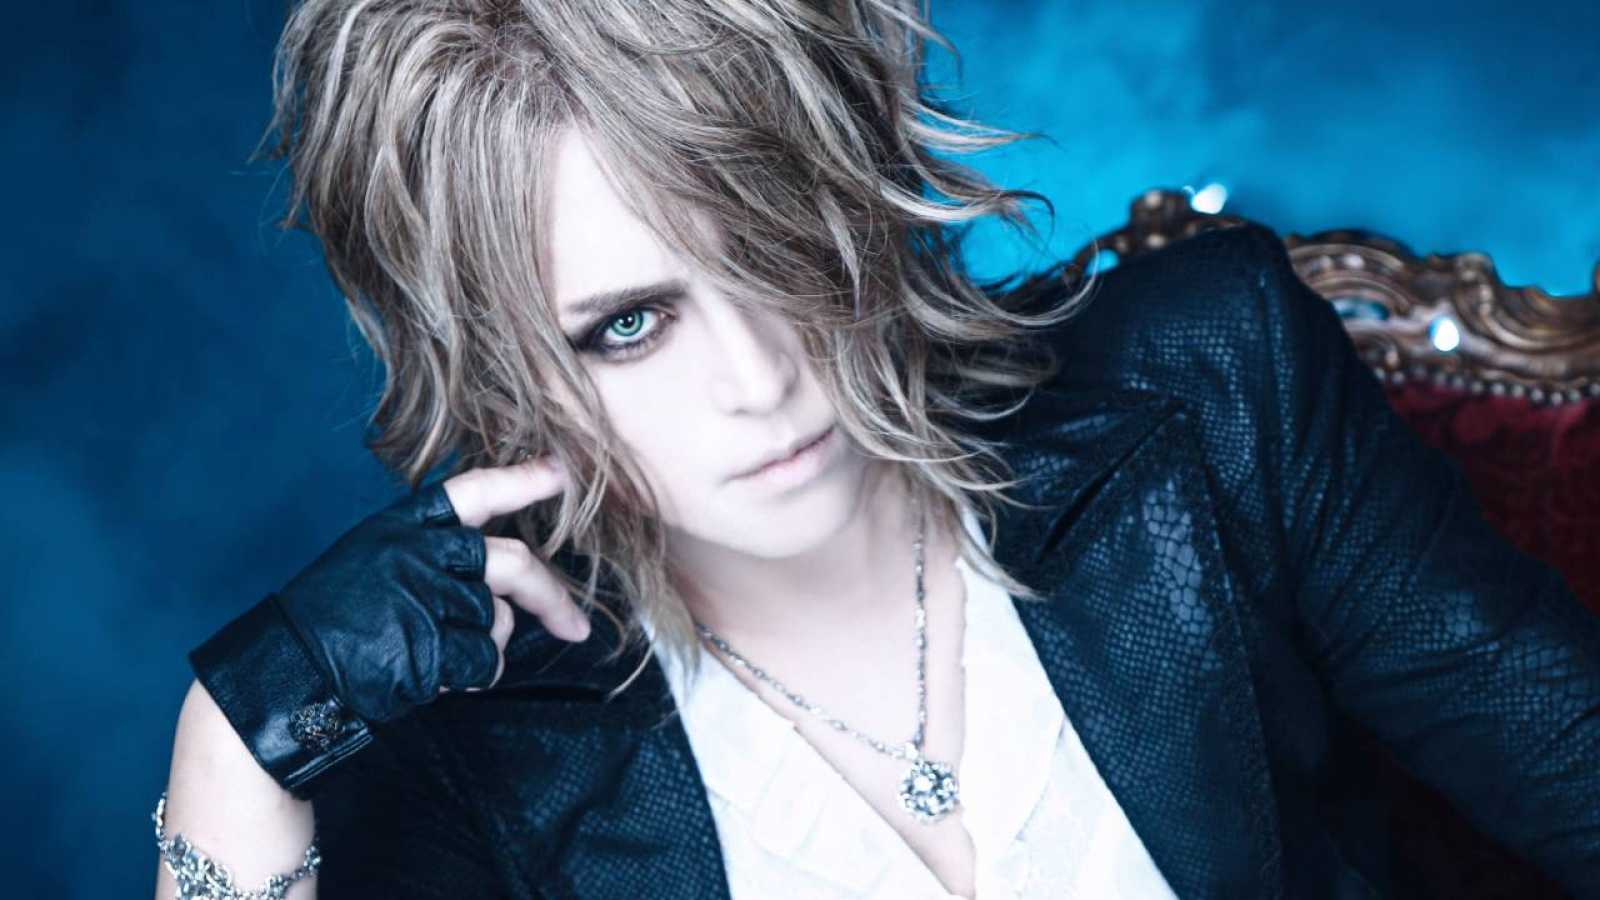 KAMIJO © CHATEAU AGENCY CO., Ltd. All rights reserved.